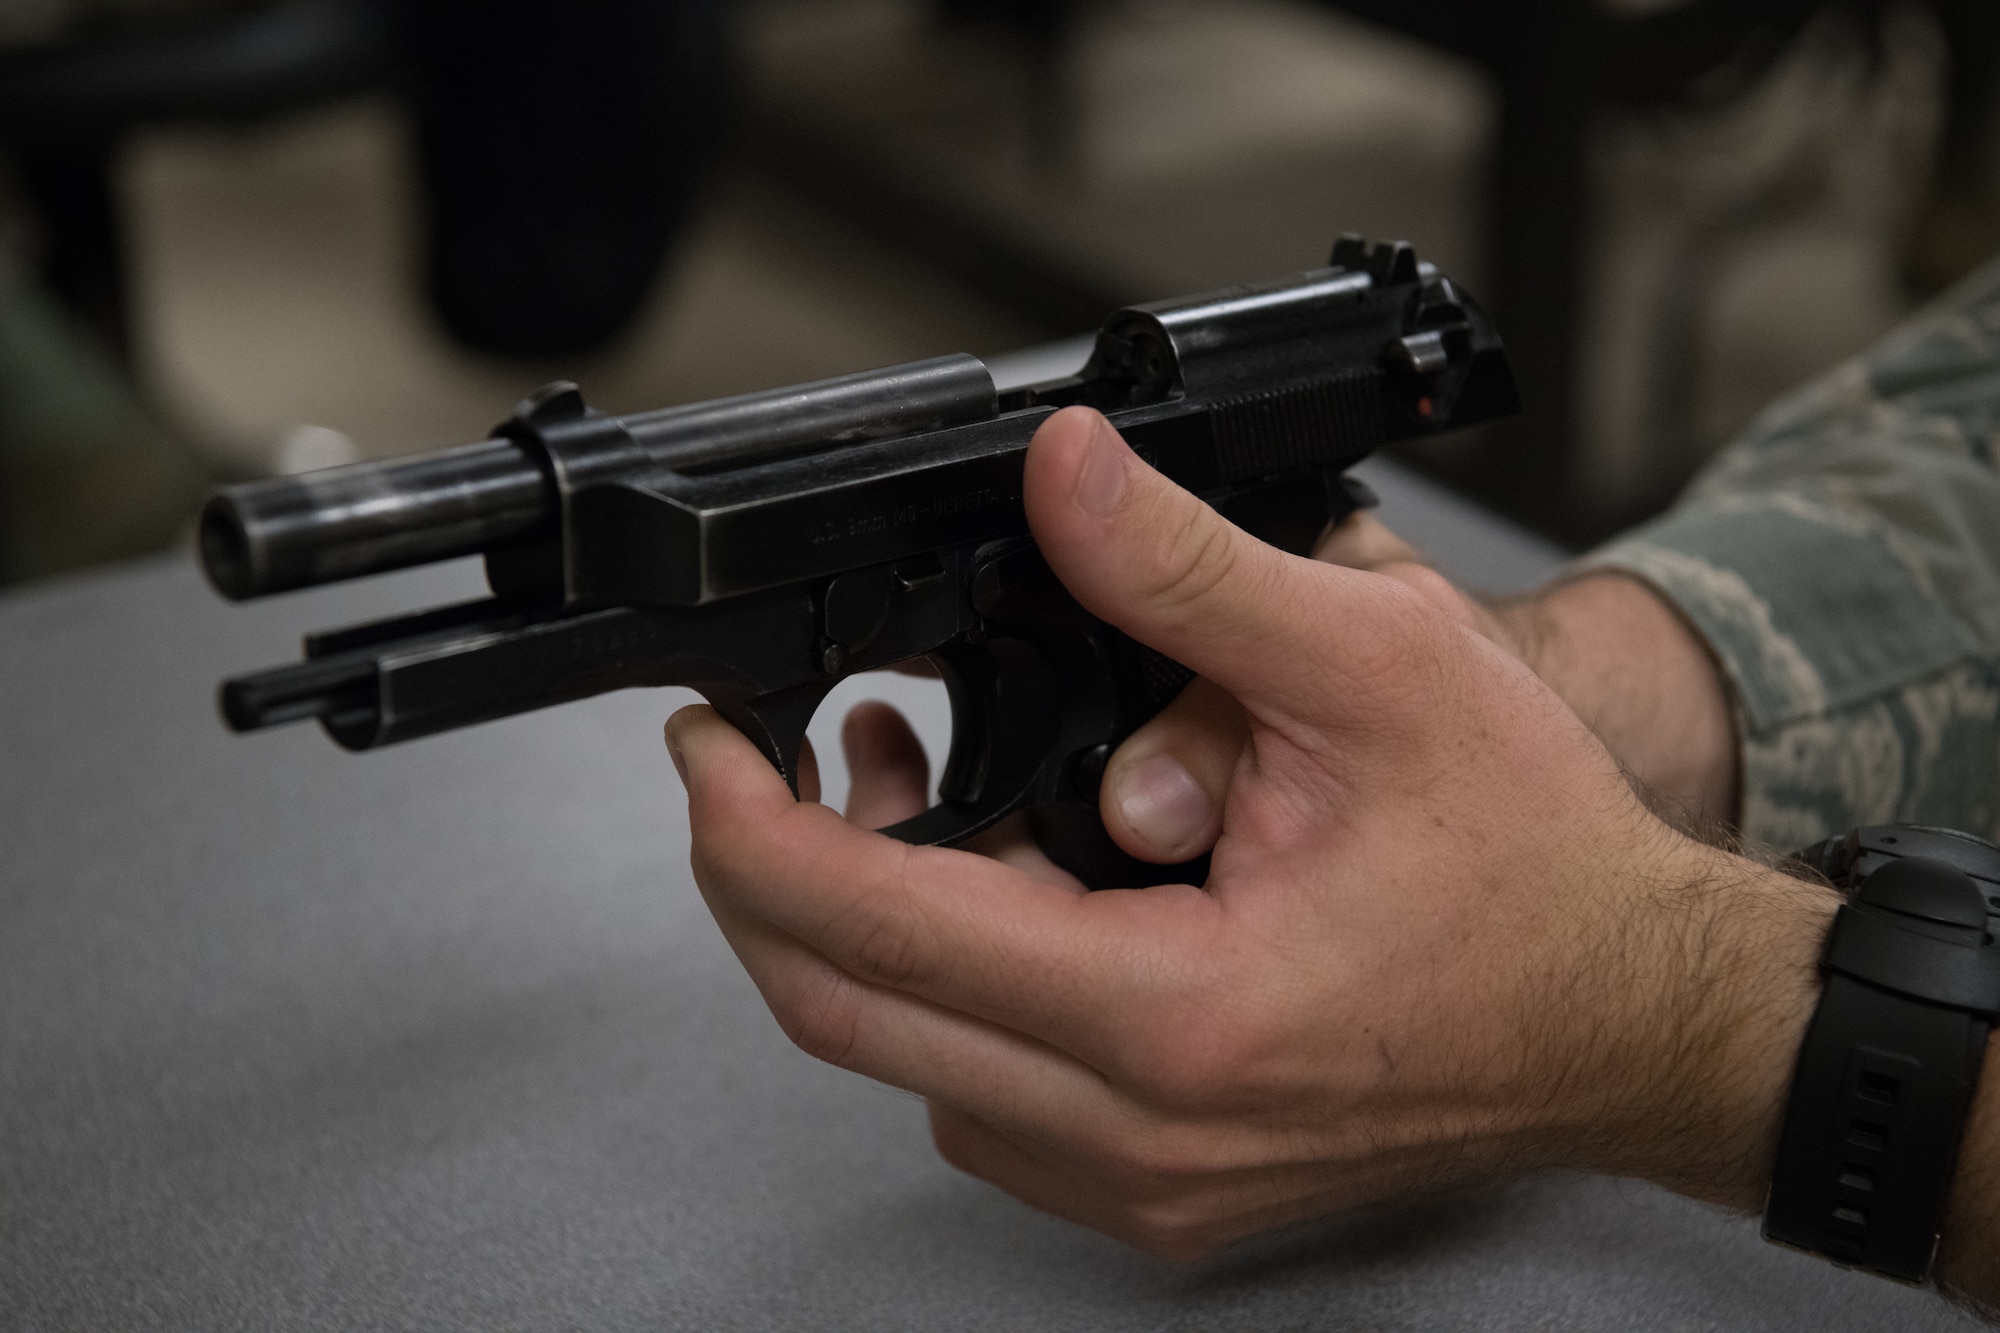 An Air Force Reserve Officer Training Corps cadet handles a Beretta M9 pistol during a class session July 9, 2020, at the Combat Arms Training and Maintenance facility on Maxwell Air Force Base, Alabama.